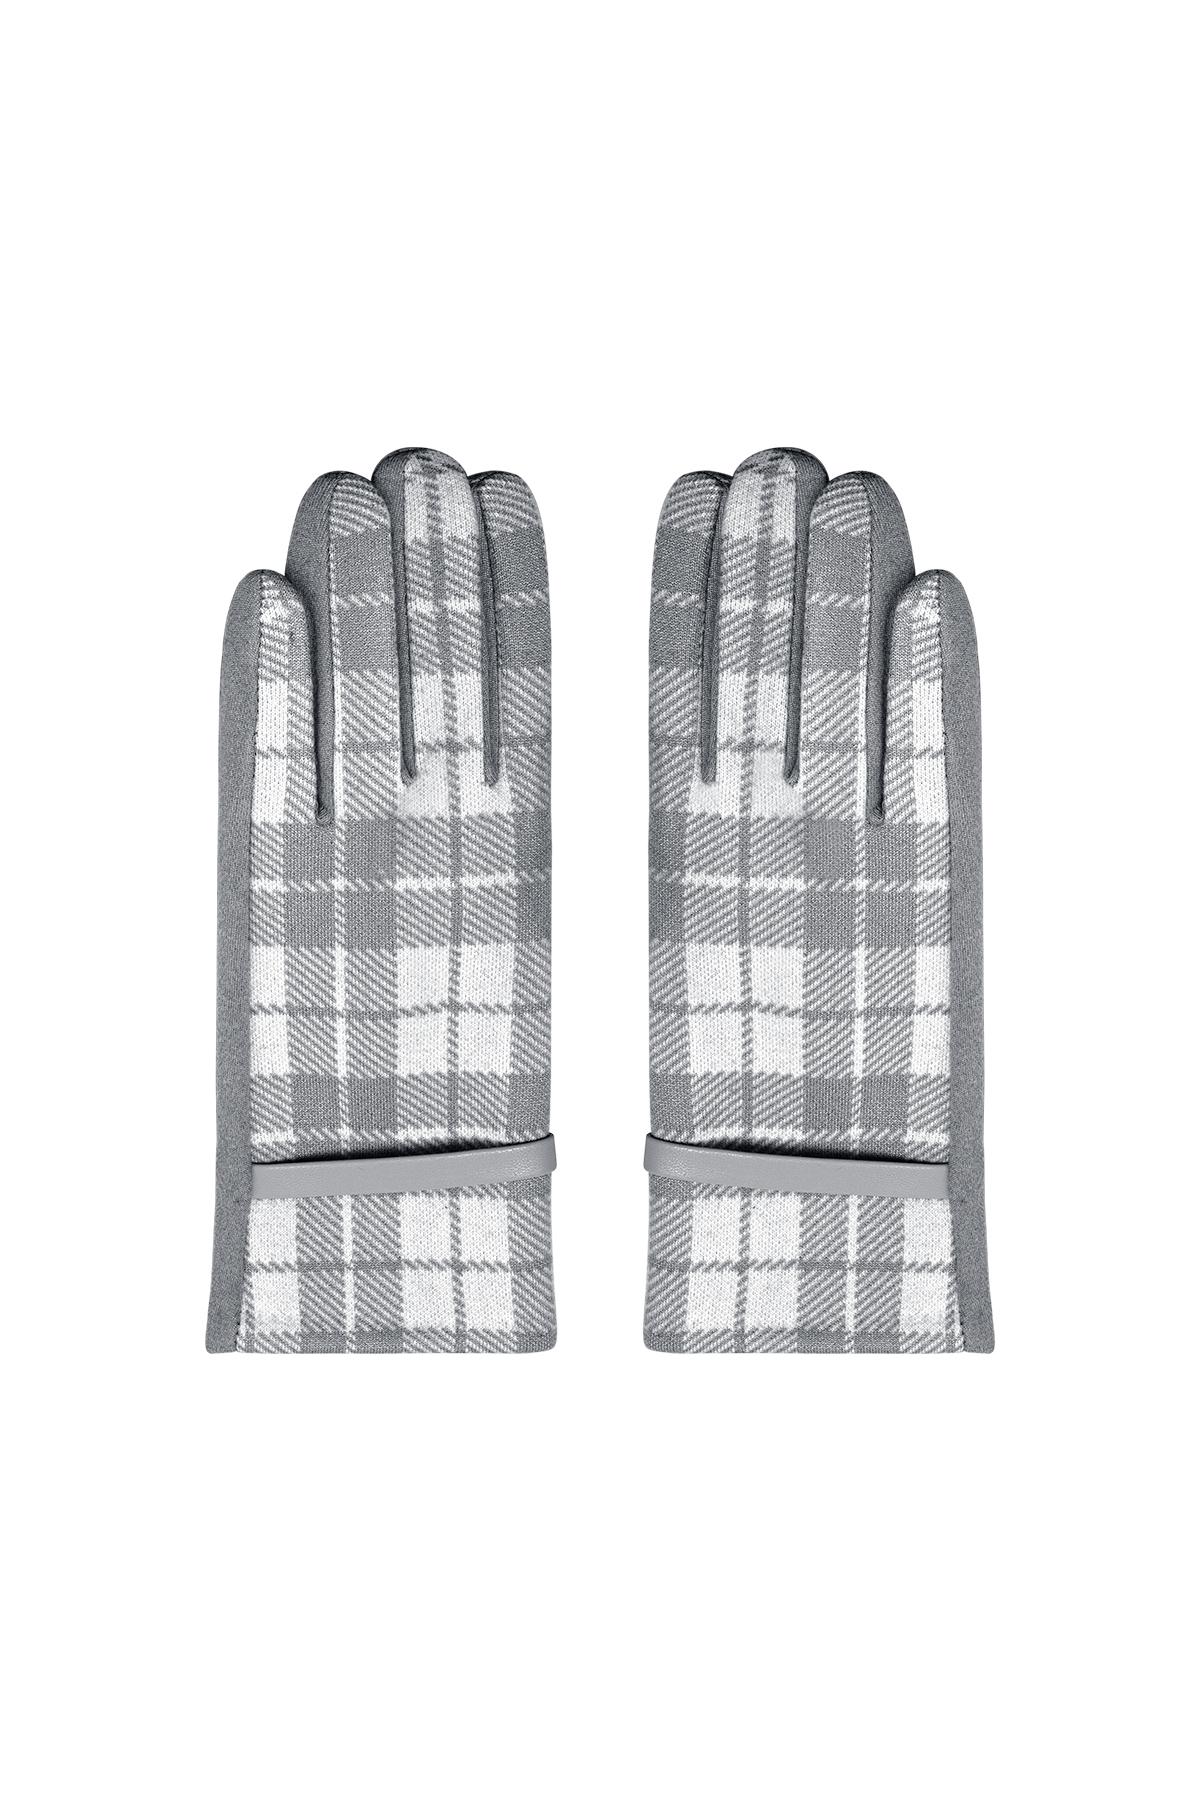 Checkered gloves Grey Polyester One size h5 